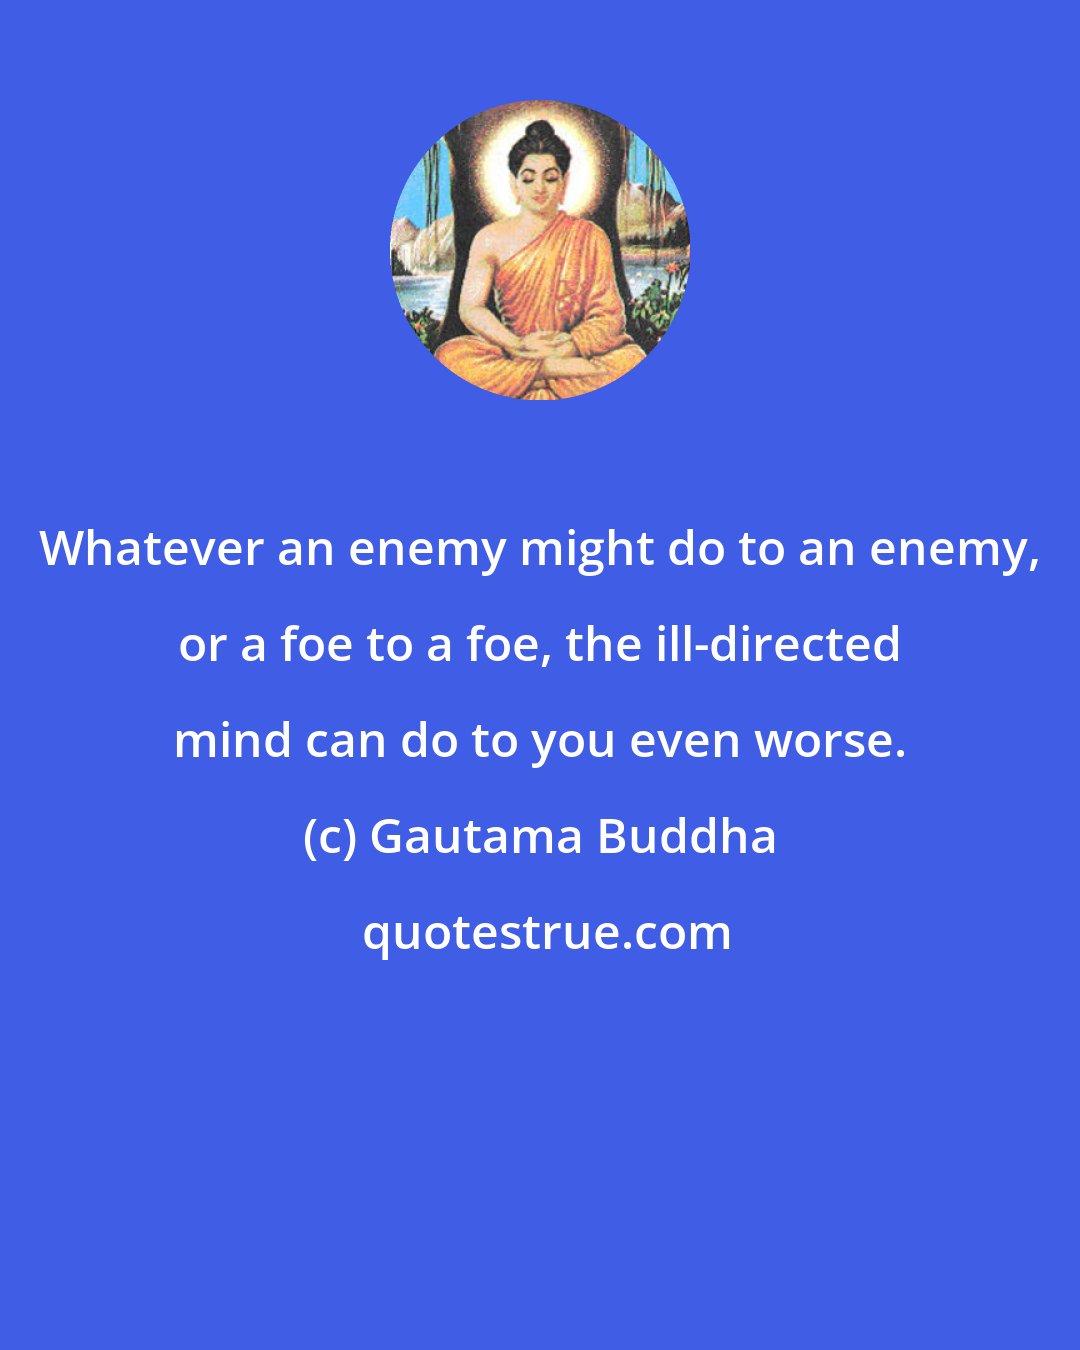 Gautama Buddha: Whatever an enemy might do to an enemy, or a foe to a foe, the ill-directed mind can do to you even worse.